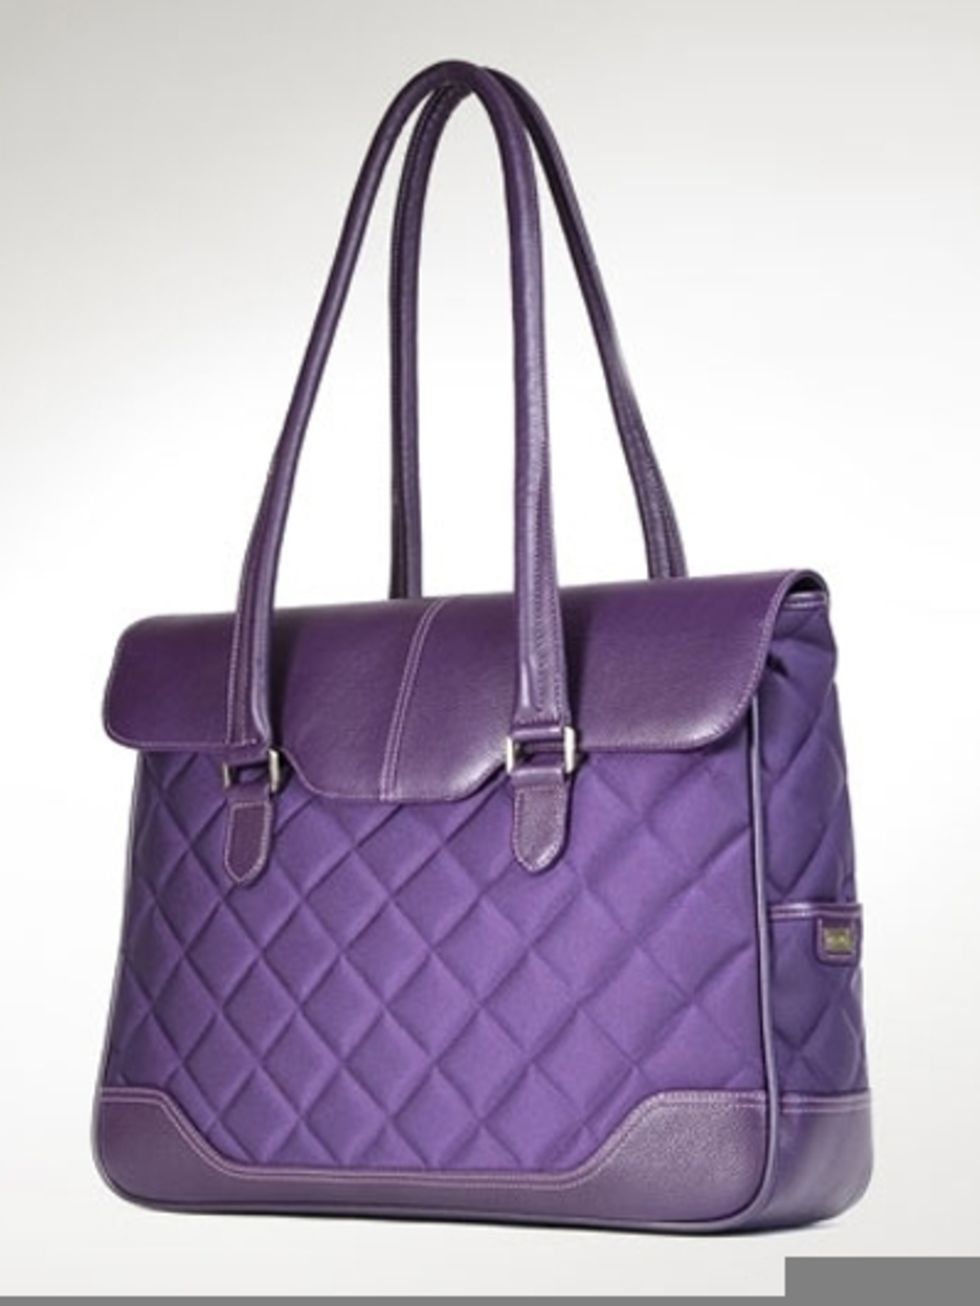 Product, Bag, Fashion accessory, Purple, White, Luggage and bags, Style, Beauty, Shoulder bag, Violet, 